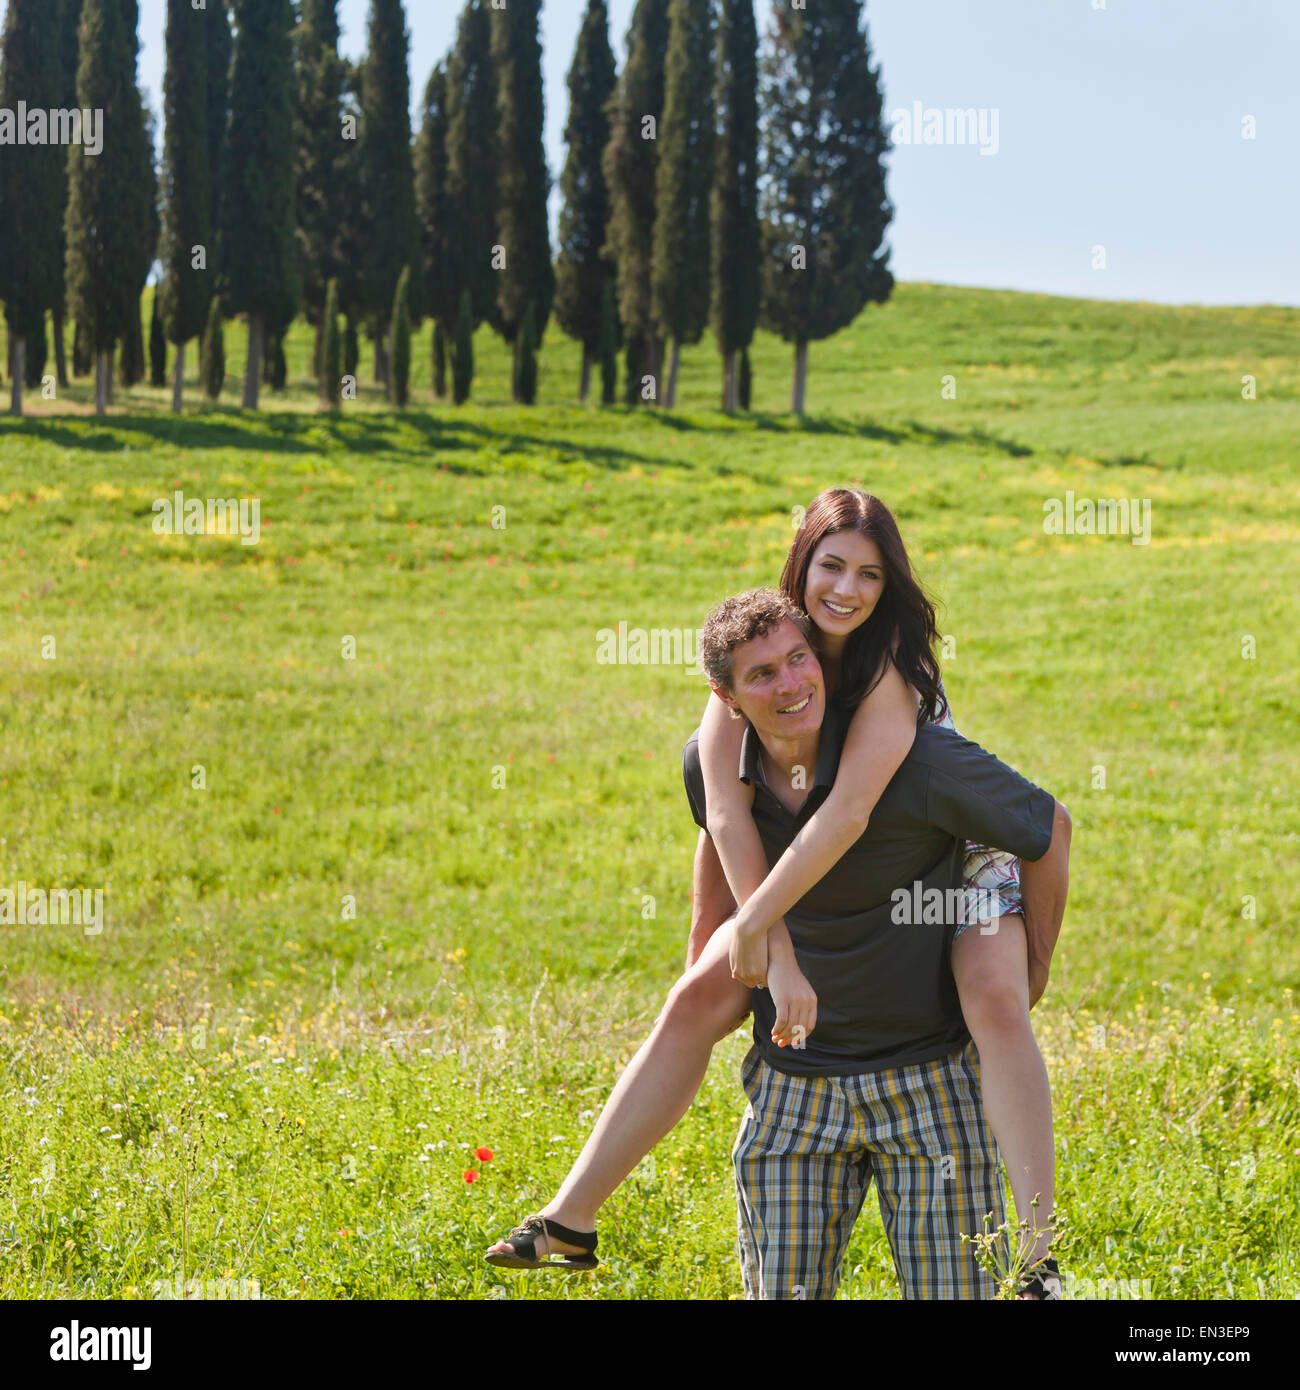 Italy, Tuscany, Man giving piggy back ride to woman on meadow Stock Photo